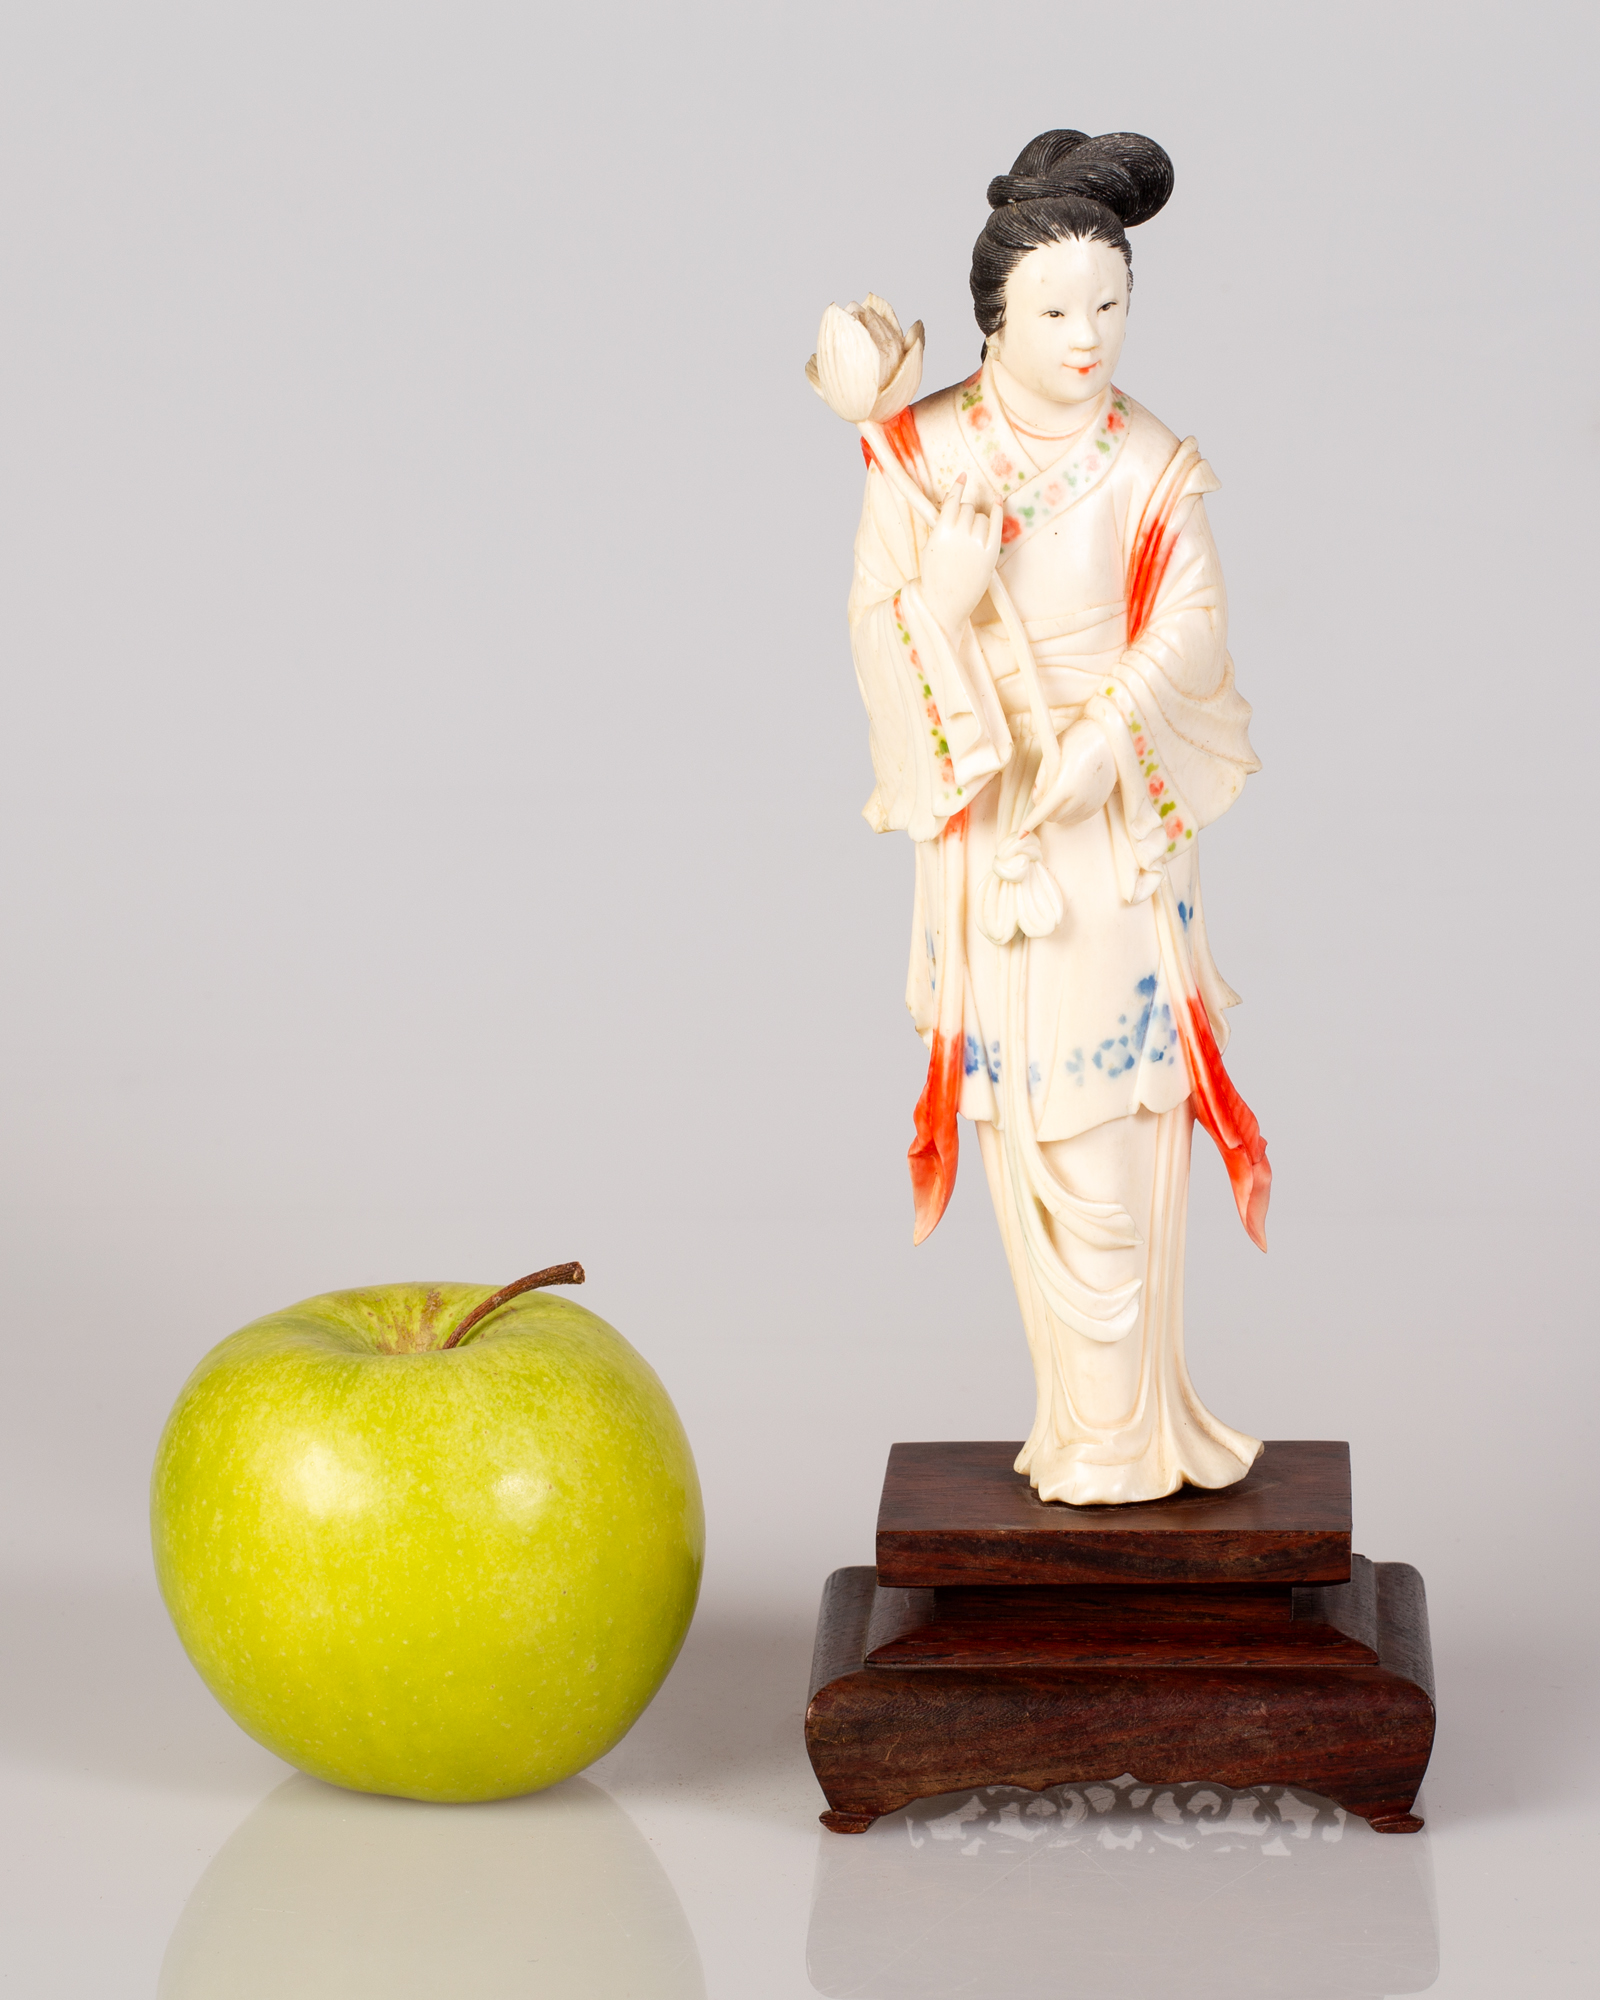 Old Chinese Bone Sculpture Girl Holding a Flower on Matching Wooden Stand - Image 3 of 3